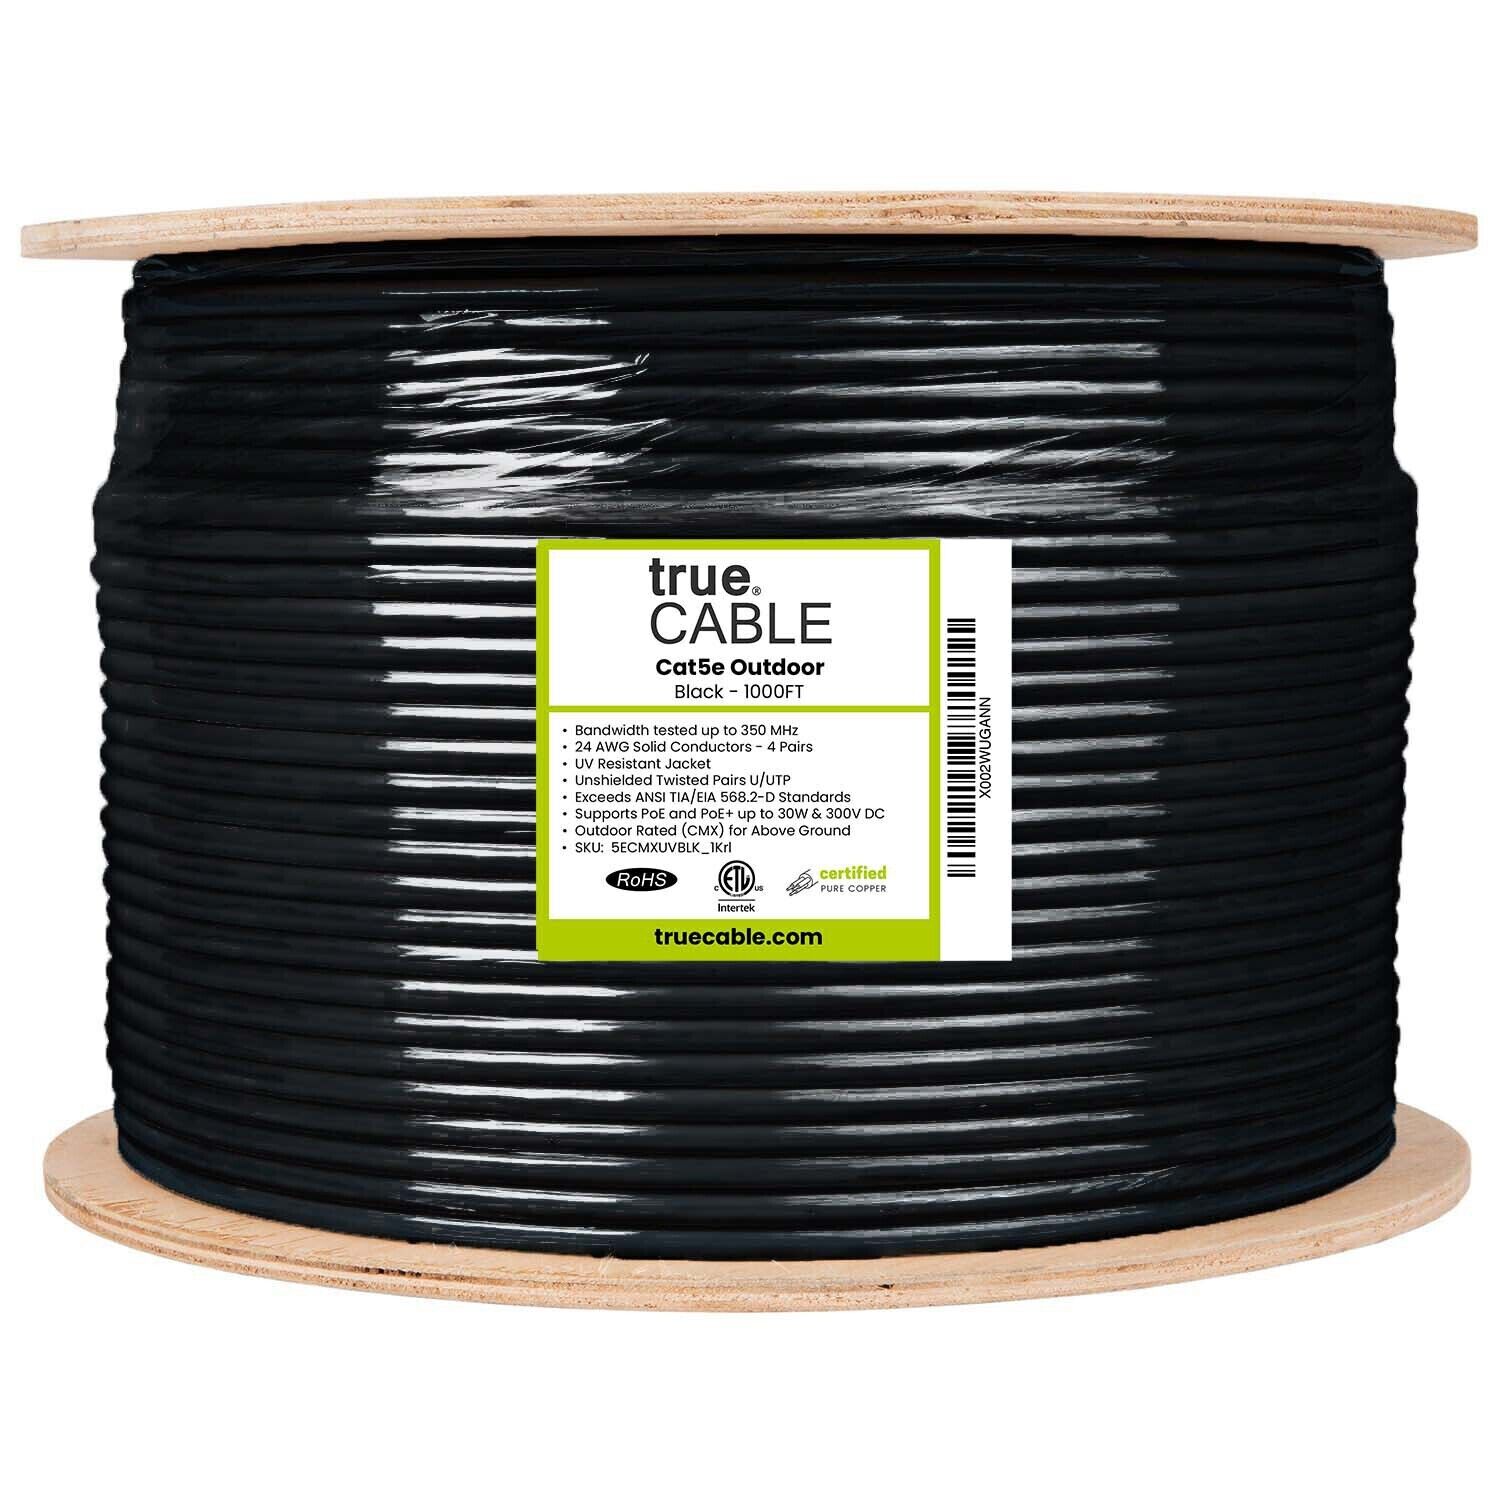 trueCABLE Cat5e Outdoor｜Unshielded